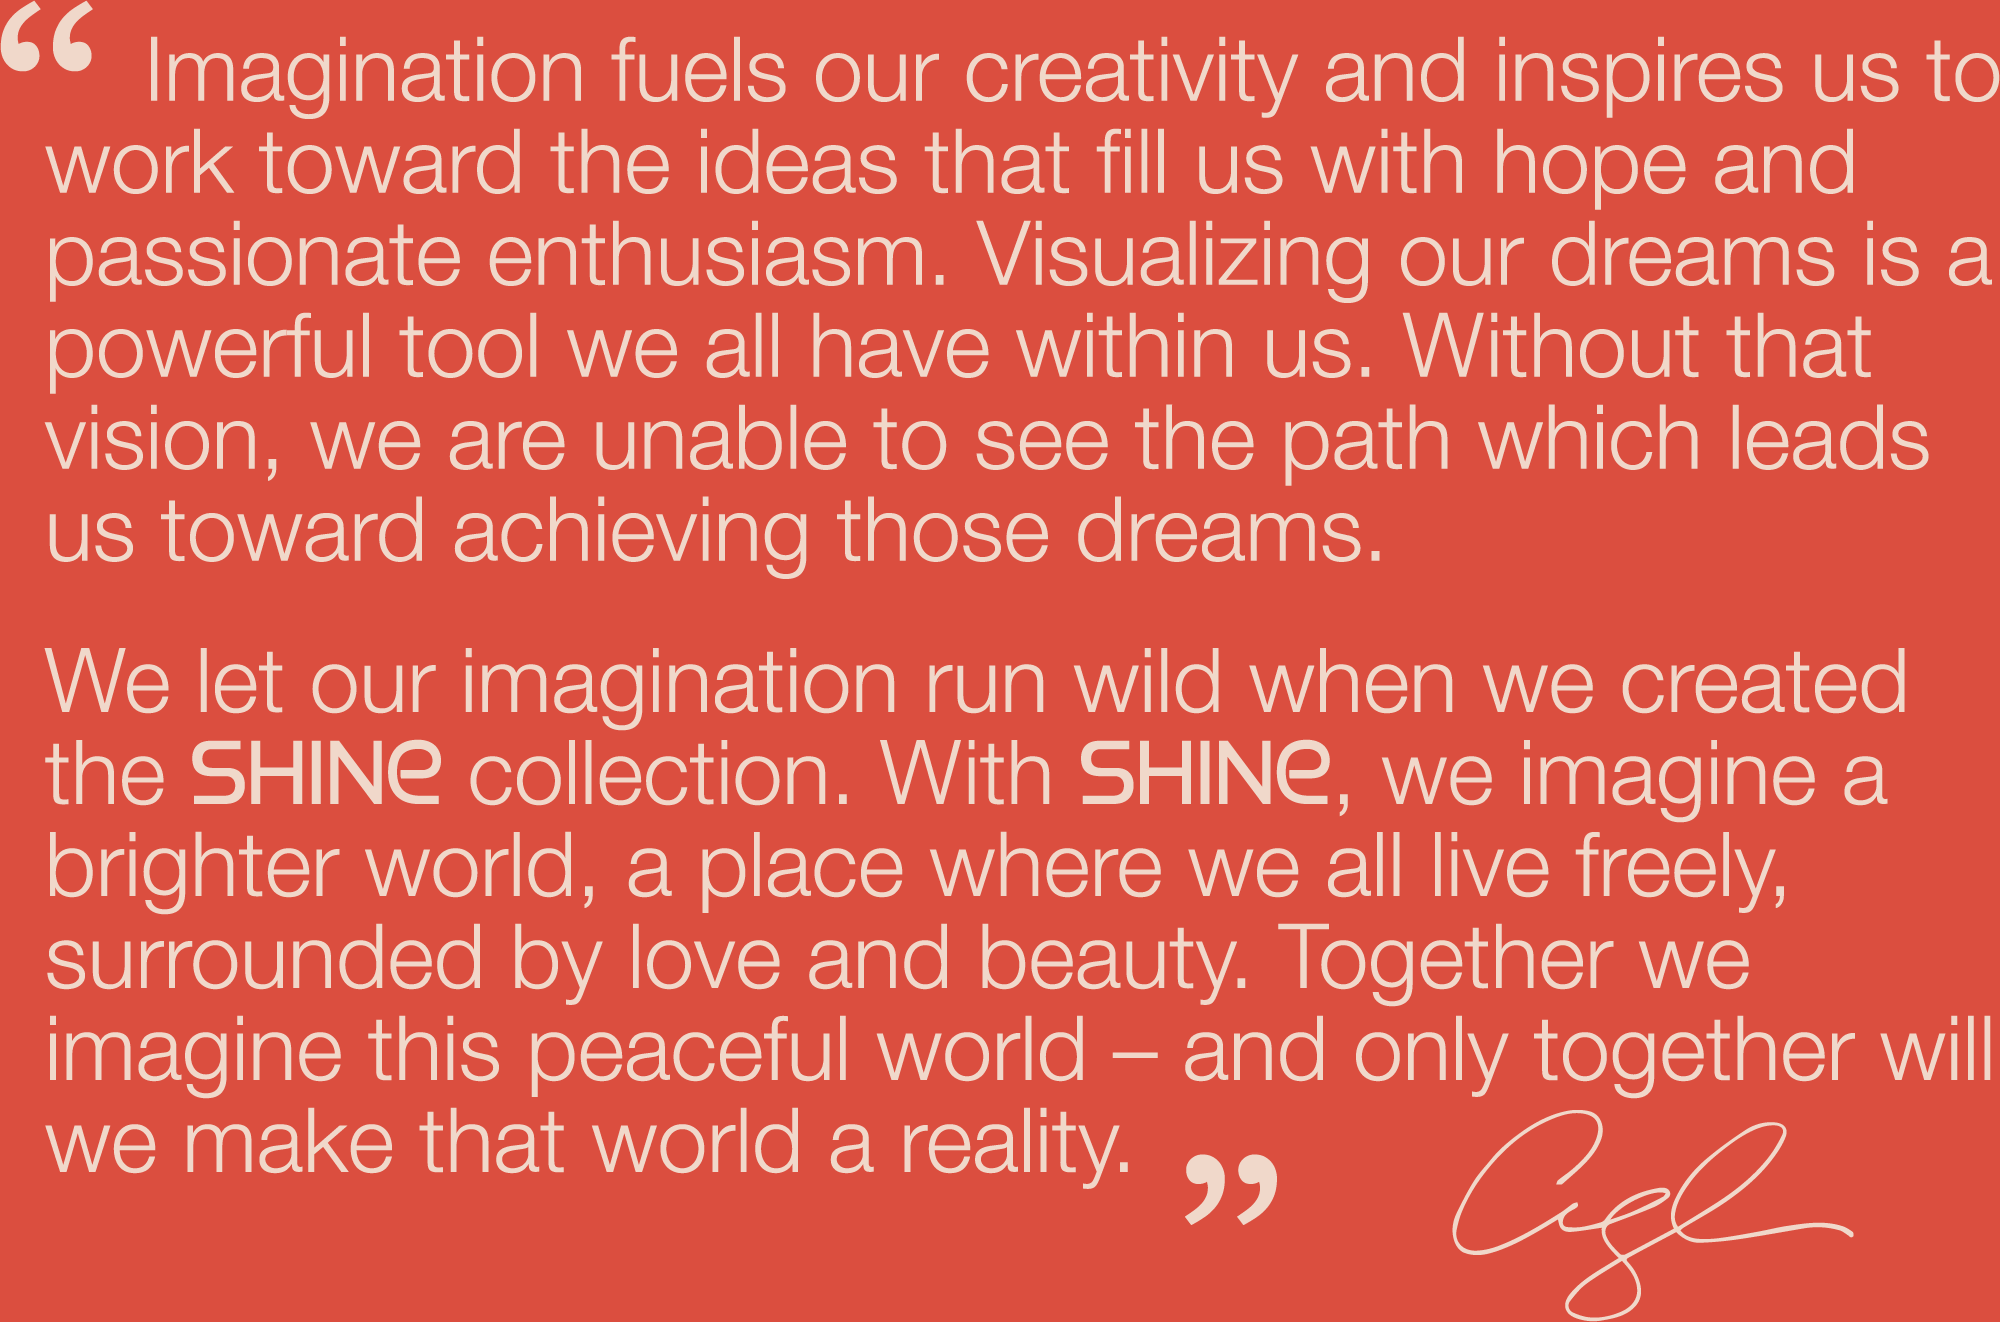 Imagination fuels our creativity and inspires us to work toward the ideas that fill us with hope and passionate enthusiasm.